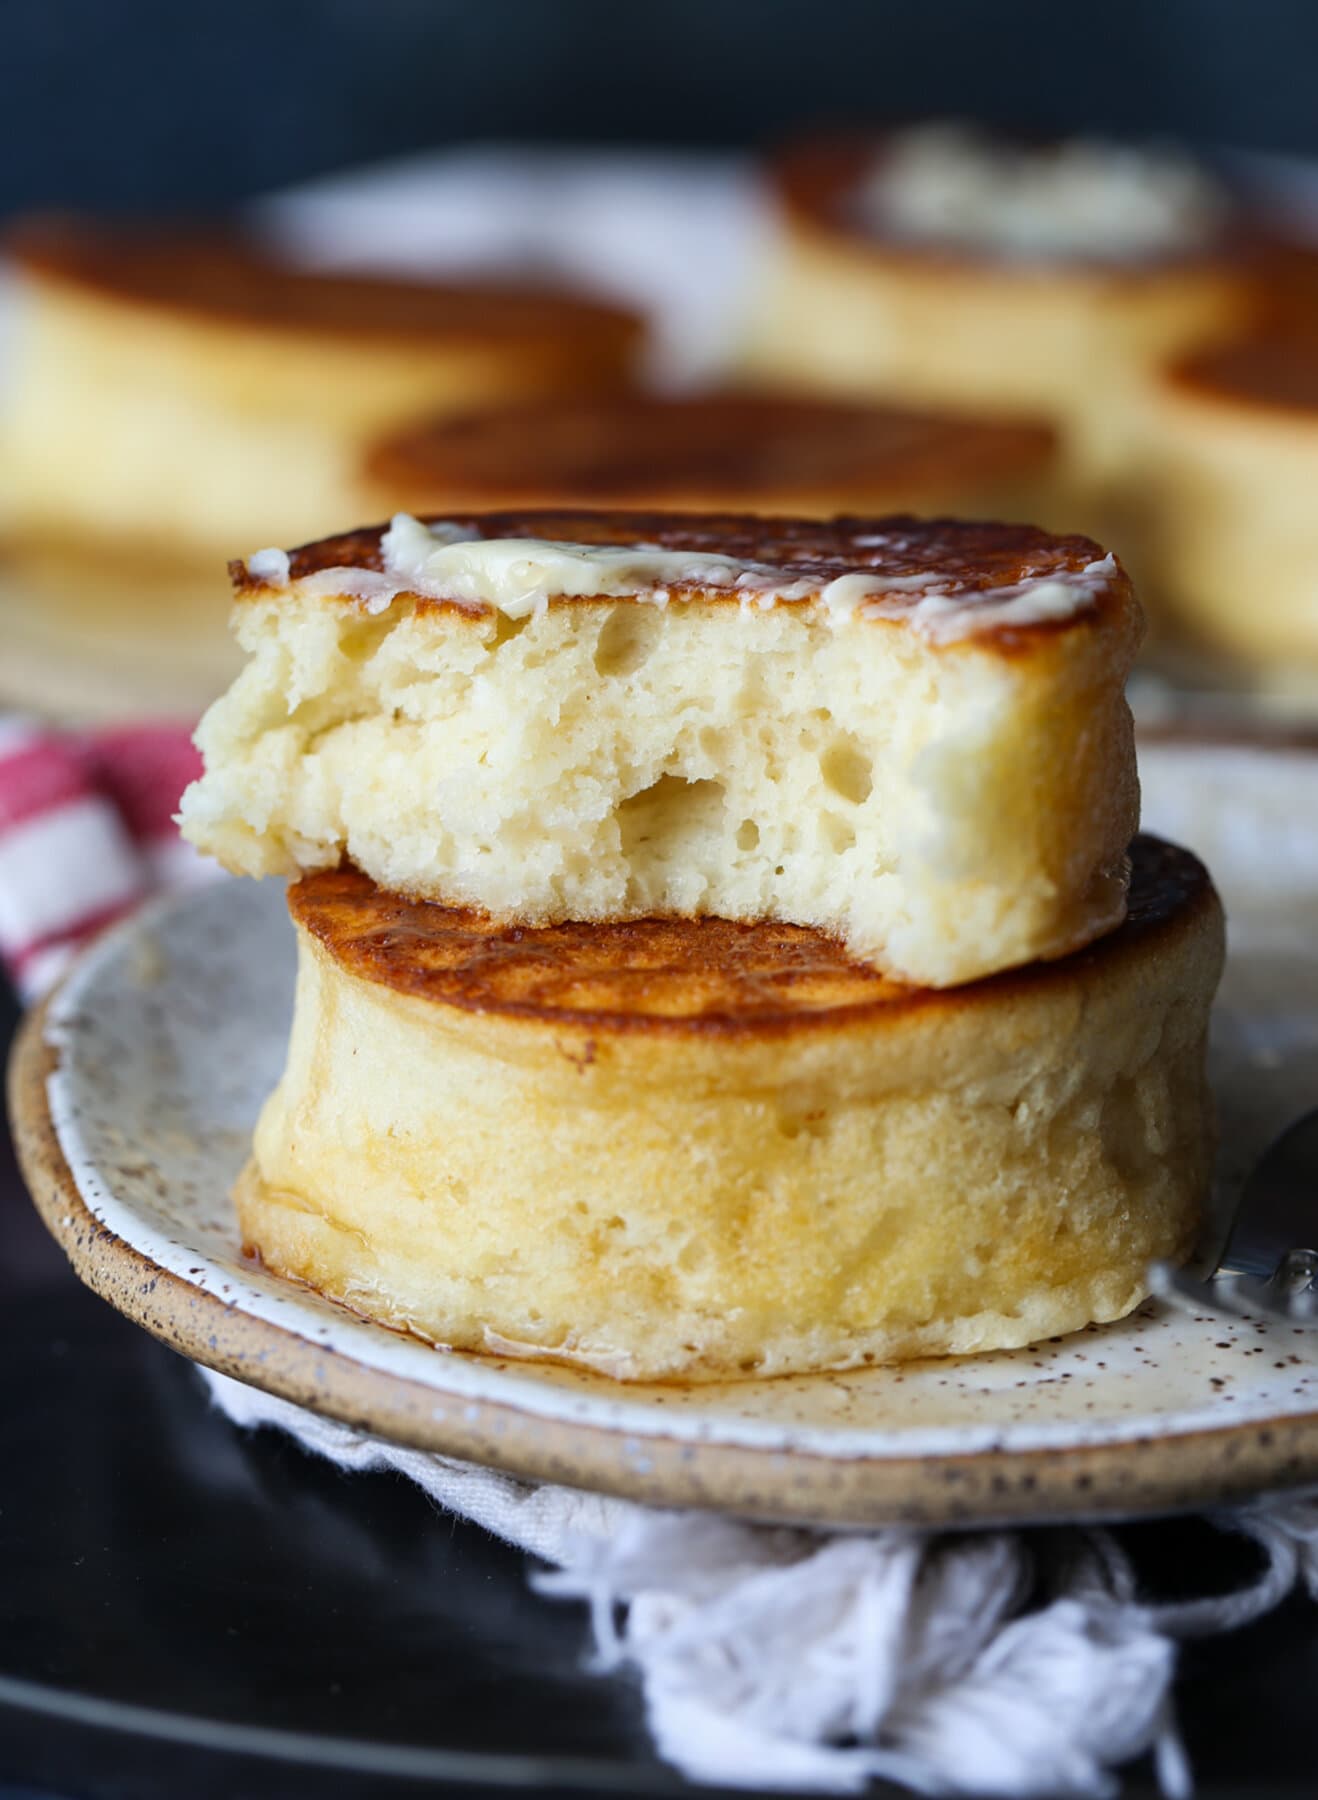 Two stacked soufflé pancakes with one broken in half showing the fluffy interior.